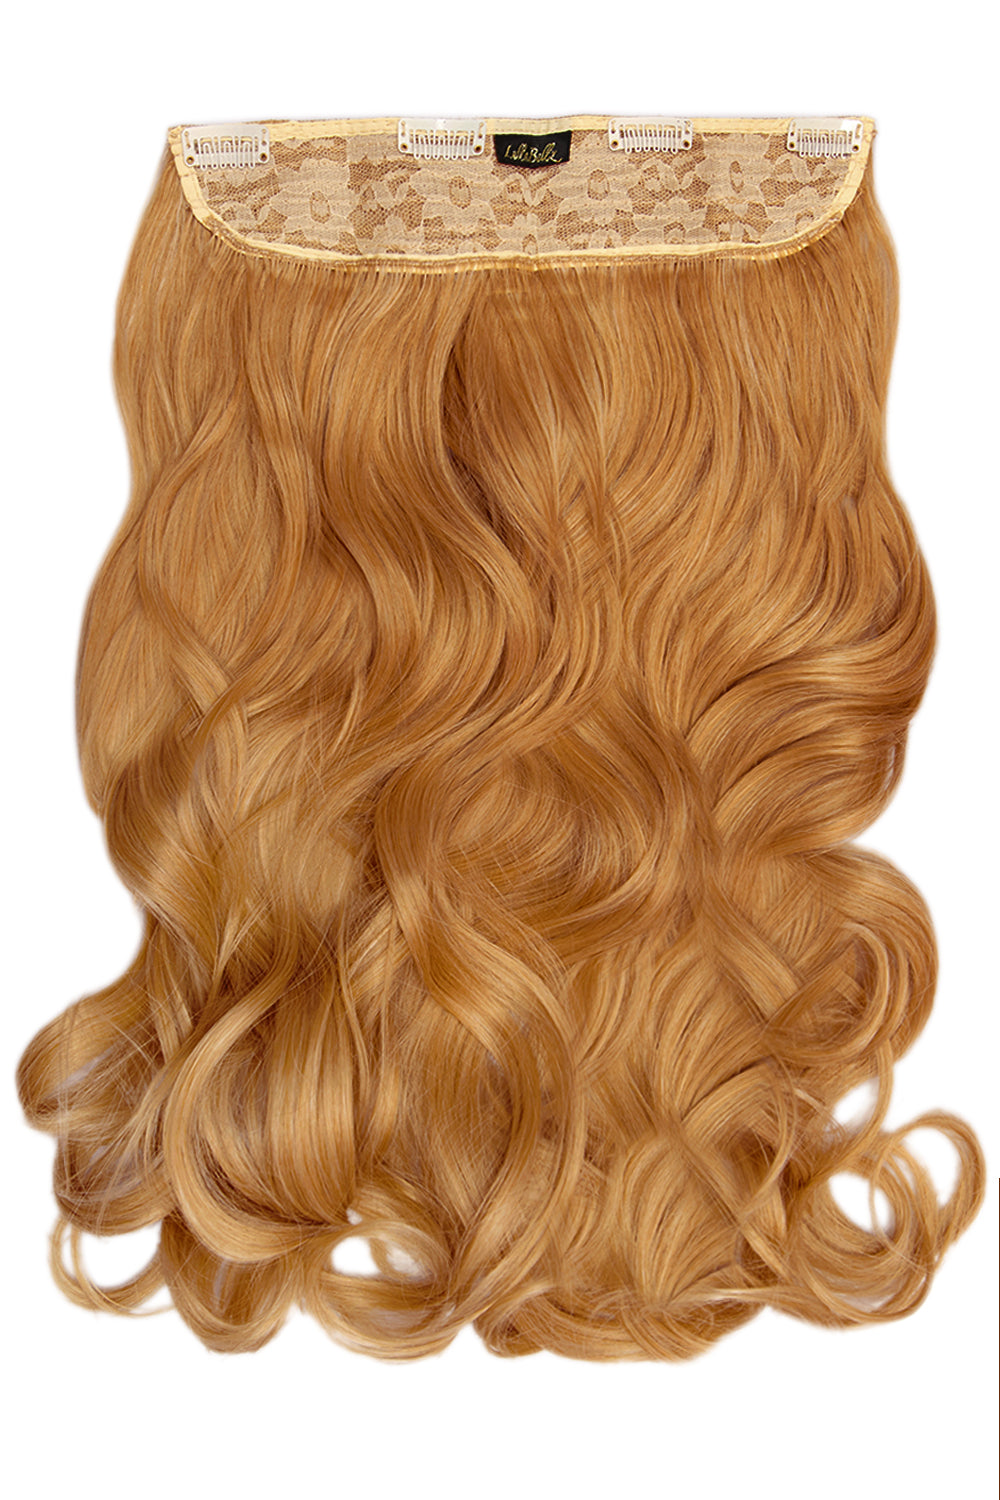 Thick 20" 1 Piece Curly Clip In Hair Extensions - LullaBellz - Strawberry Blonde